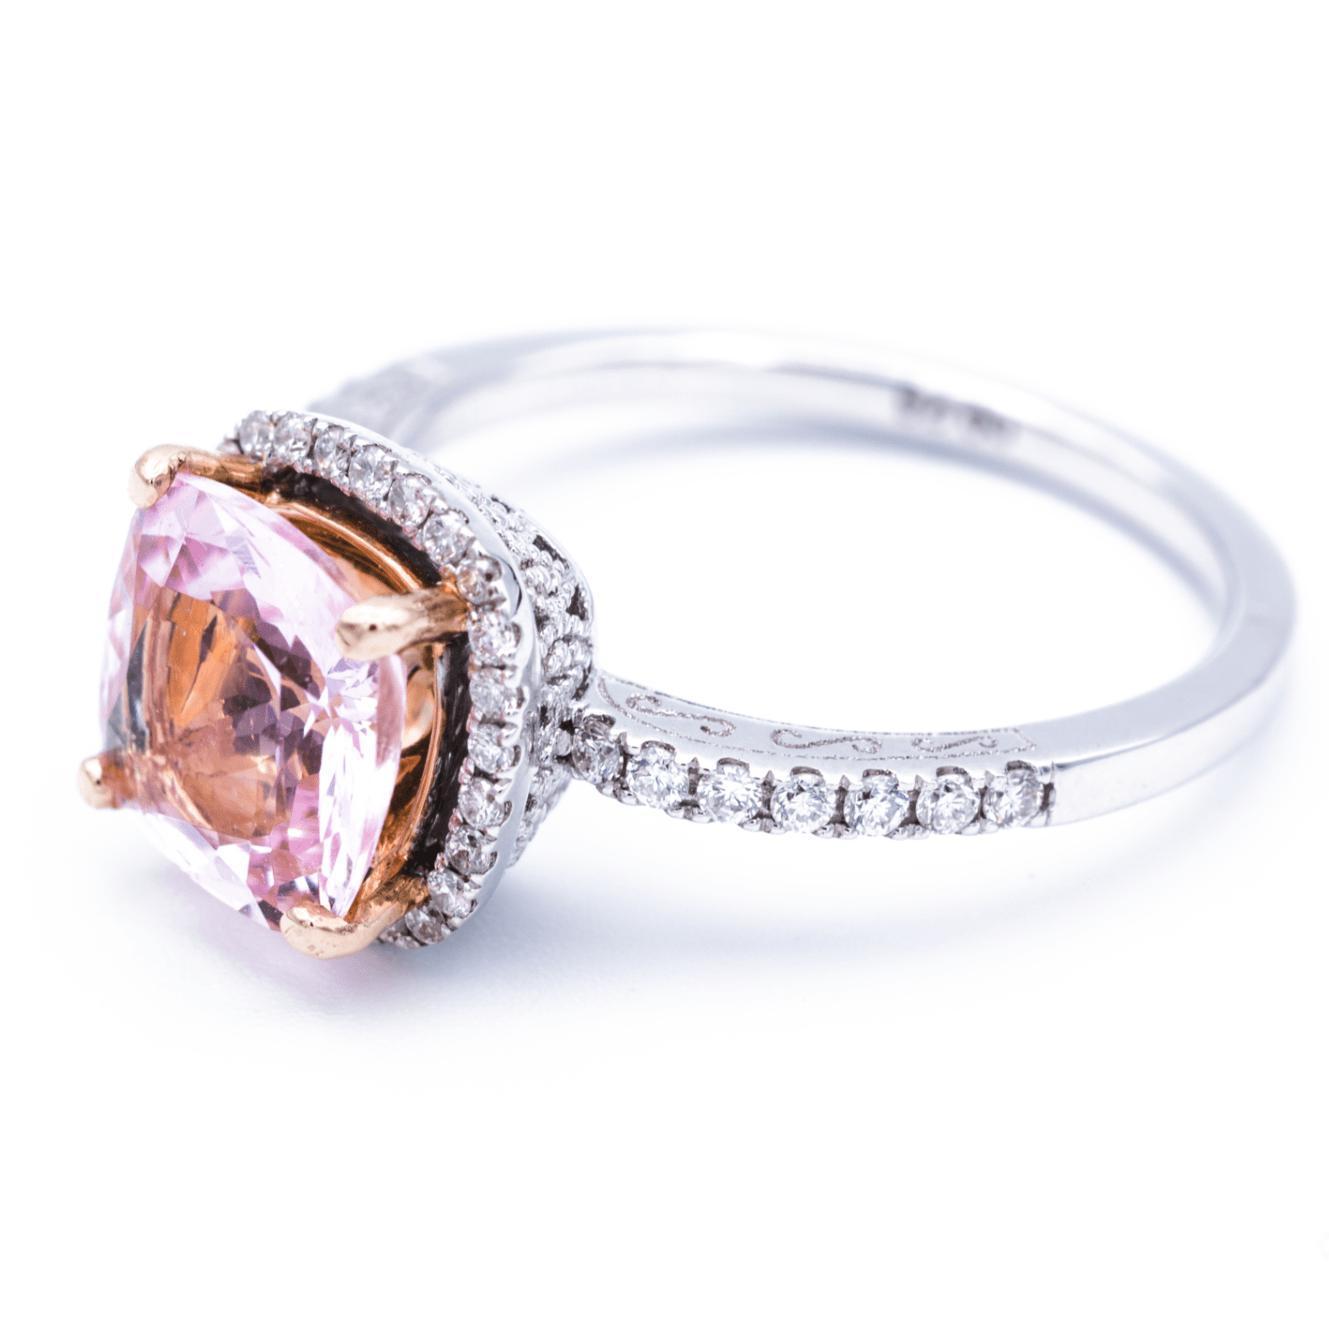 8.2mm x 8.2mm Cushion Pink Morganite Center Gem 14k Solid Rose Gold Prongs and White Gold Band Antique Diamond Filigree Design 2.1 Carat Total Weight-Fire & Brilliance ® Creative Designs-Fire & Brilliance ®